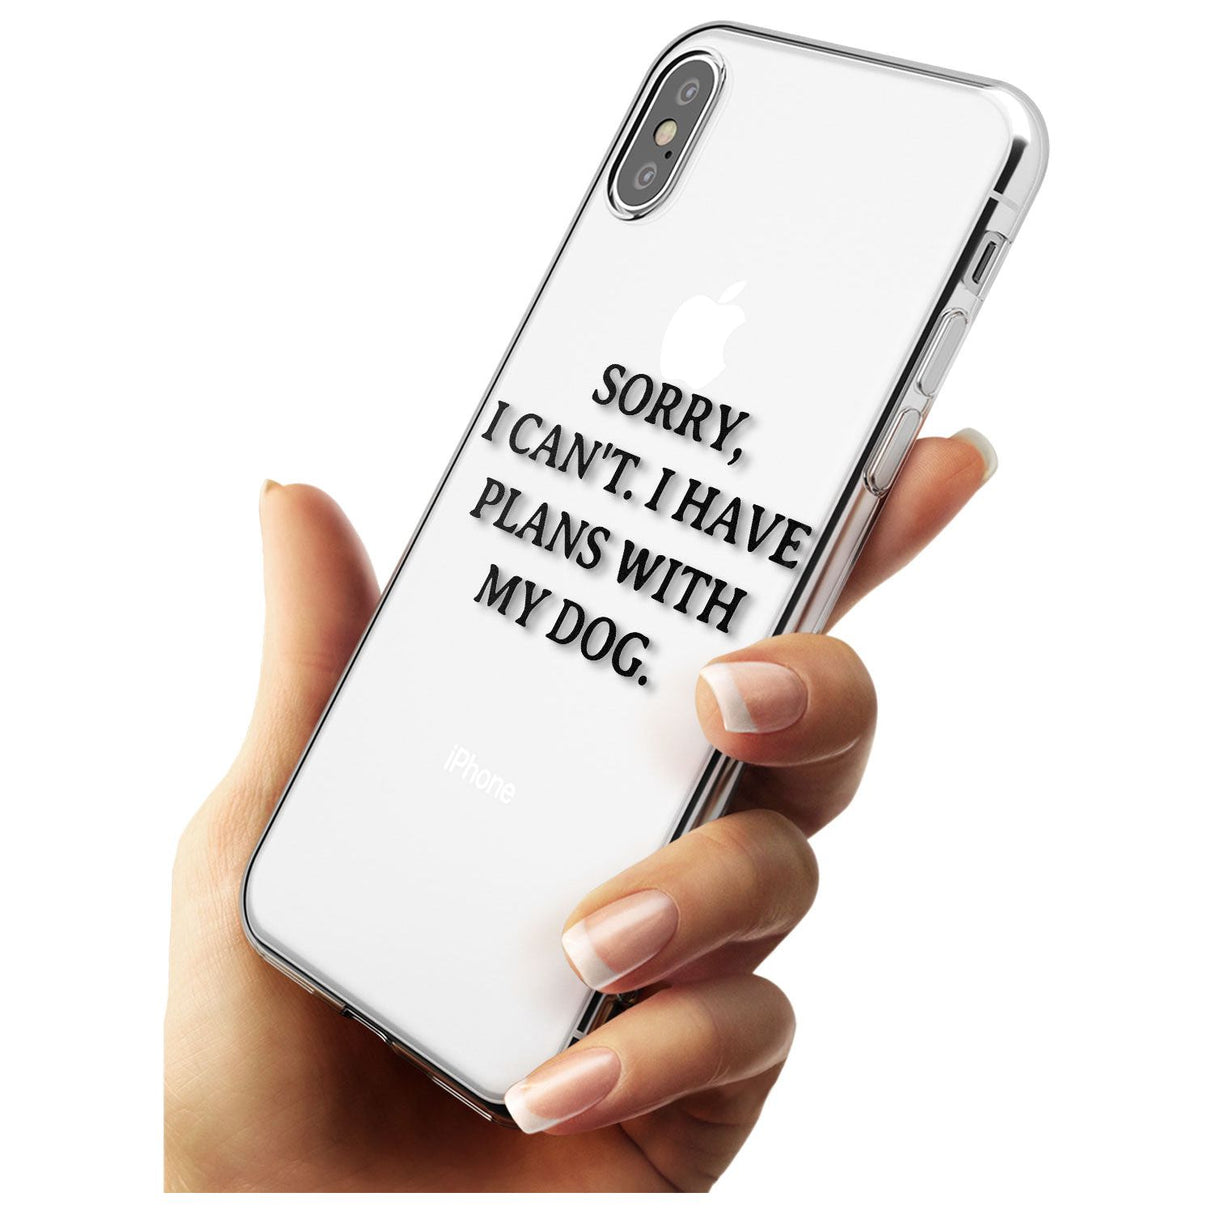 Plans with Dog Slim TPU Phone Case Warehouse X XS Max XR